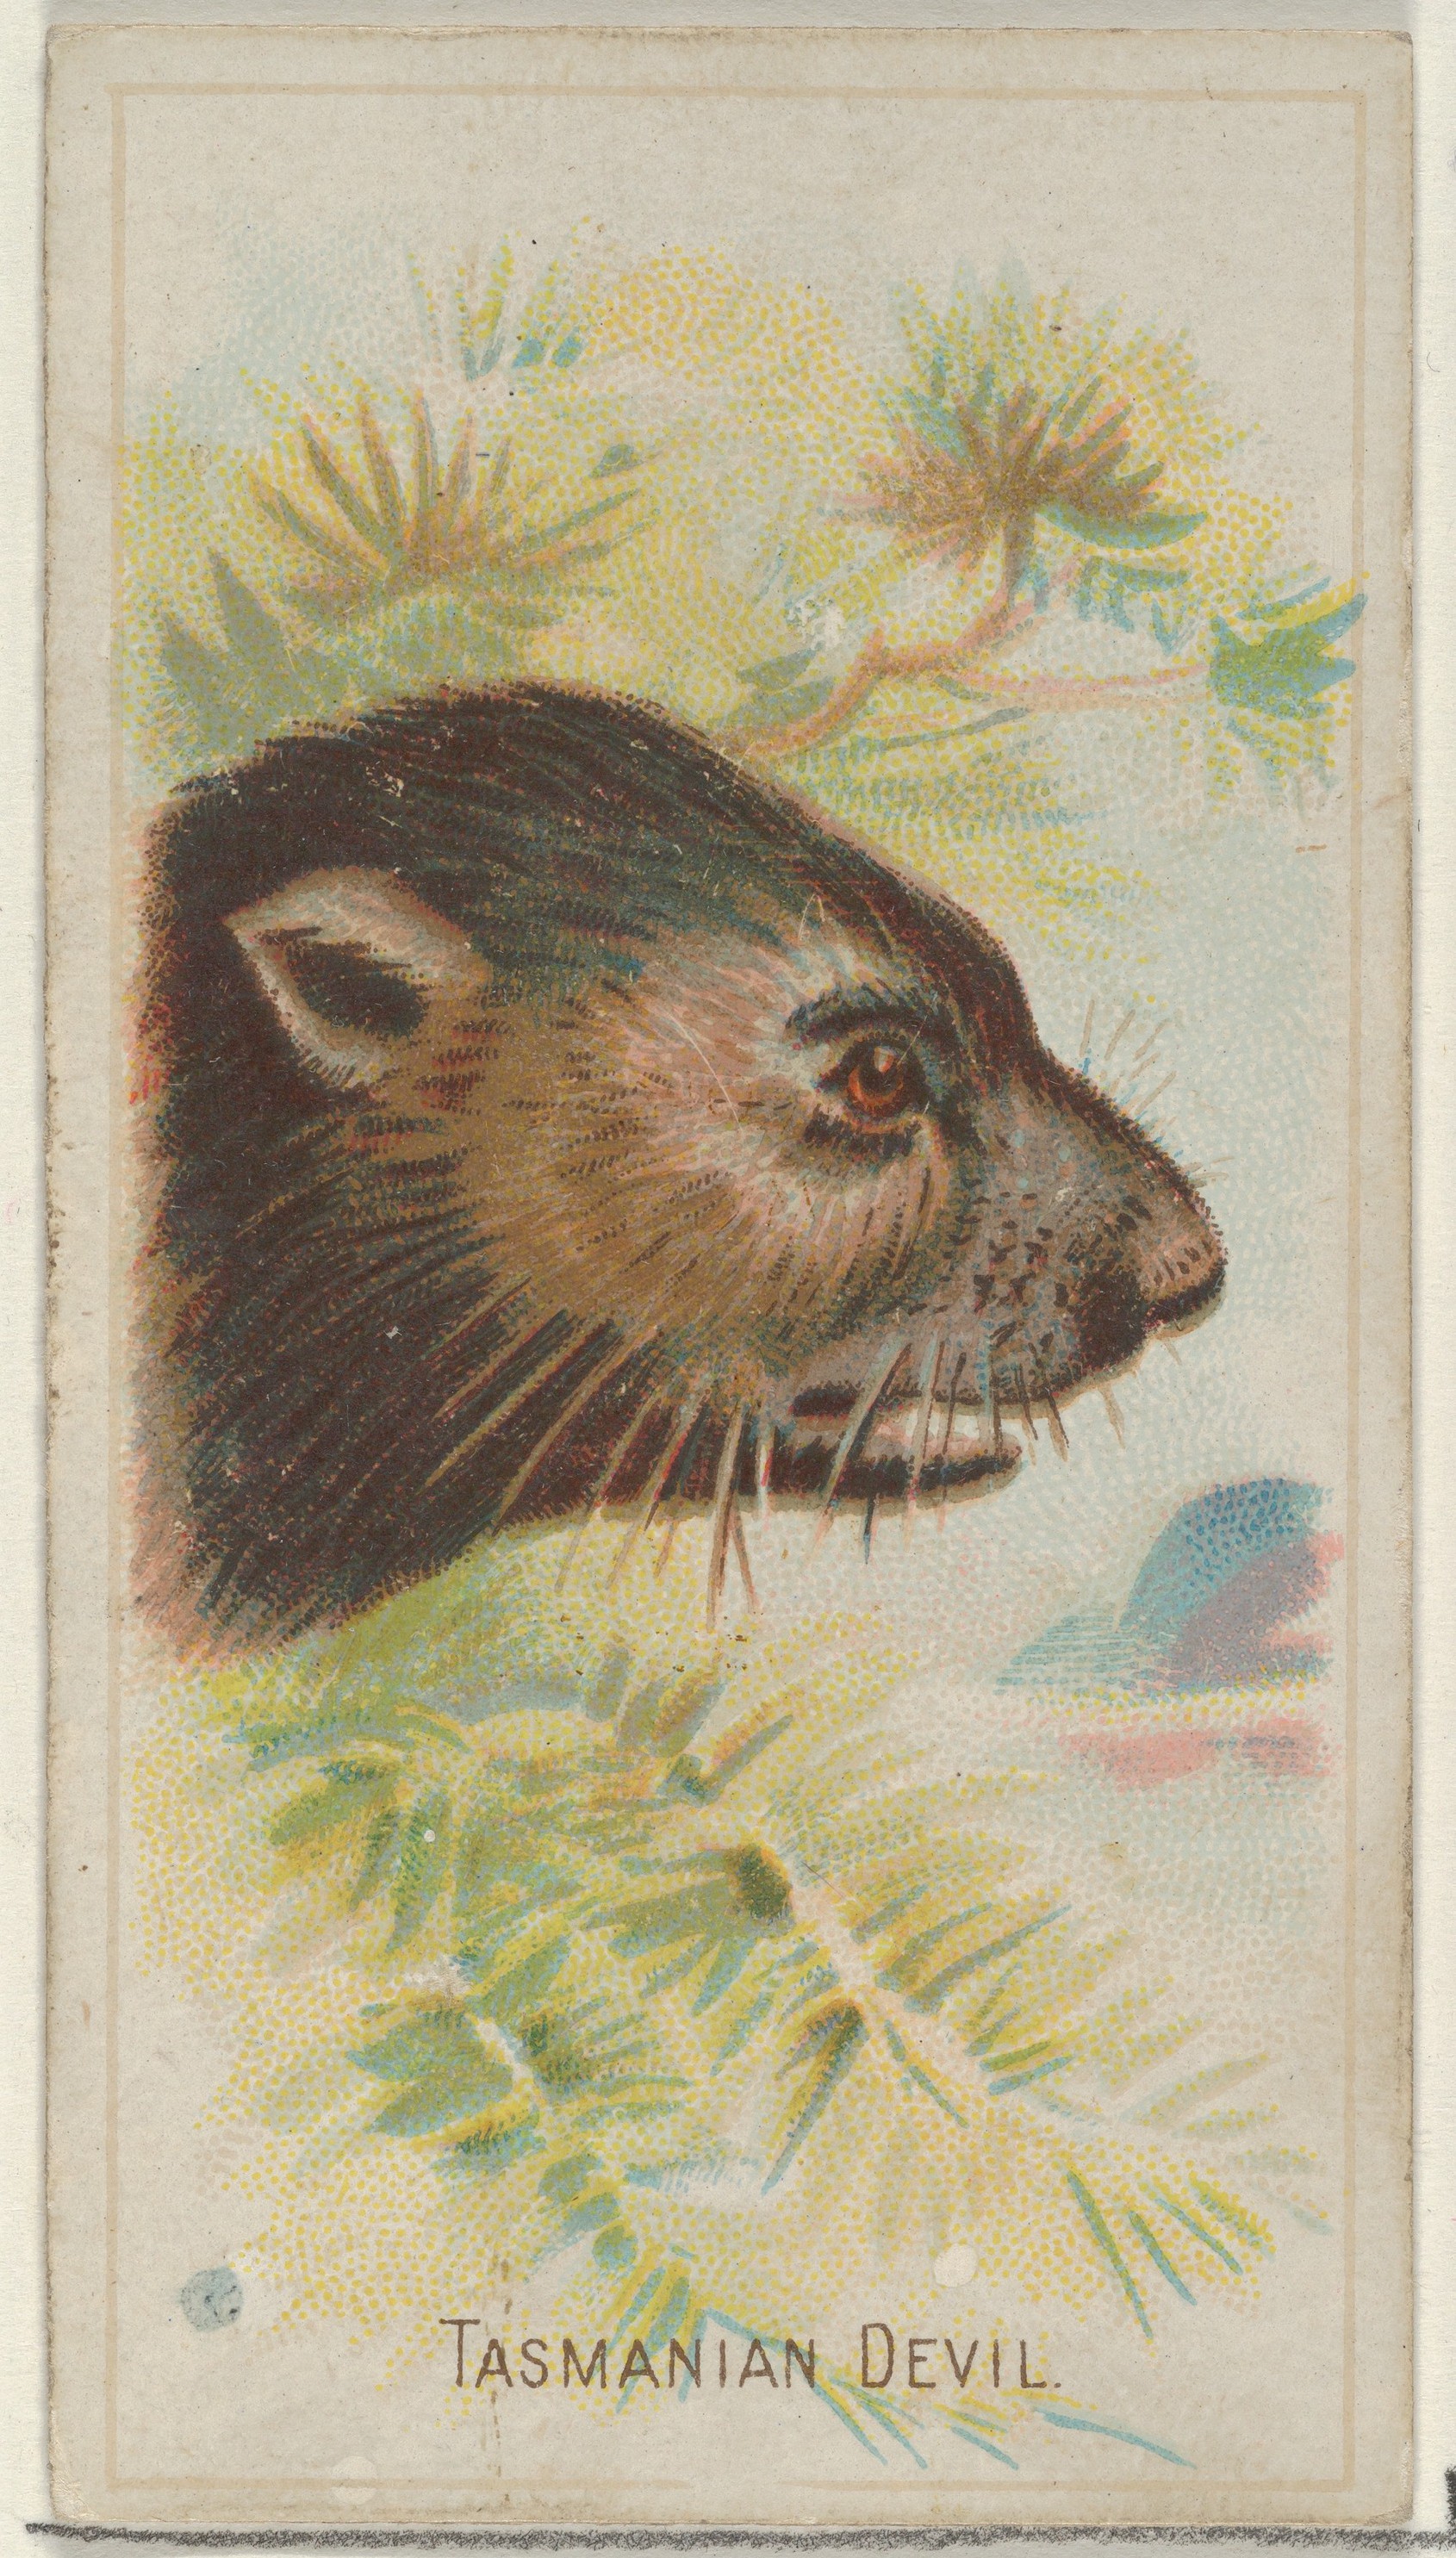 Allen & Ginter | Tasmanian Devil, from the Wild Animals of the World series  (N25) for Allen & Ginter Cigarettes | The Metropolitan Museum of Art